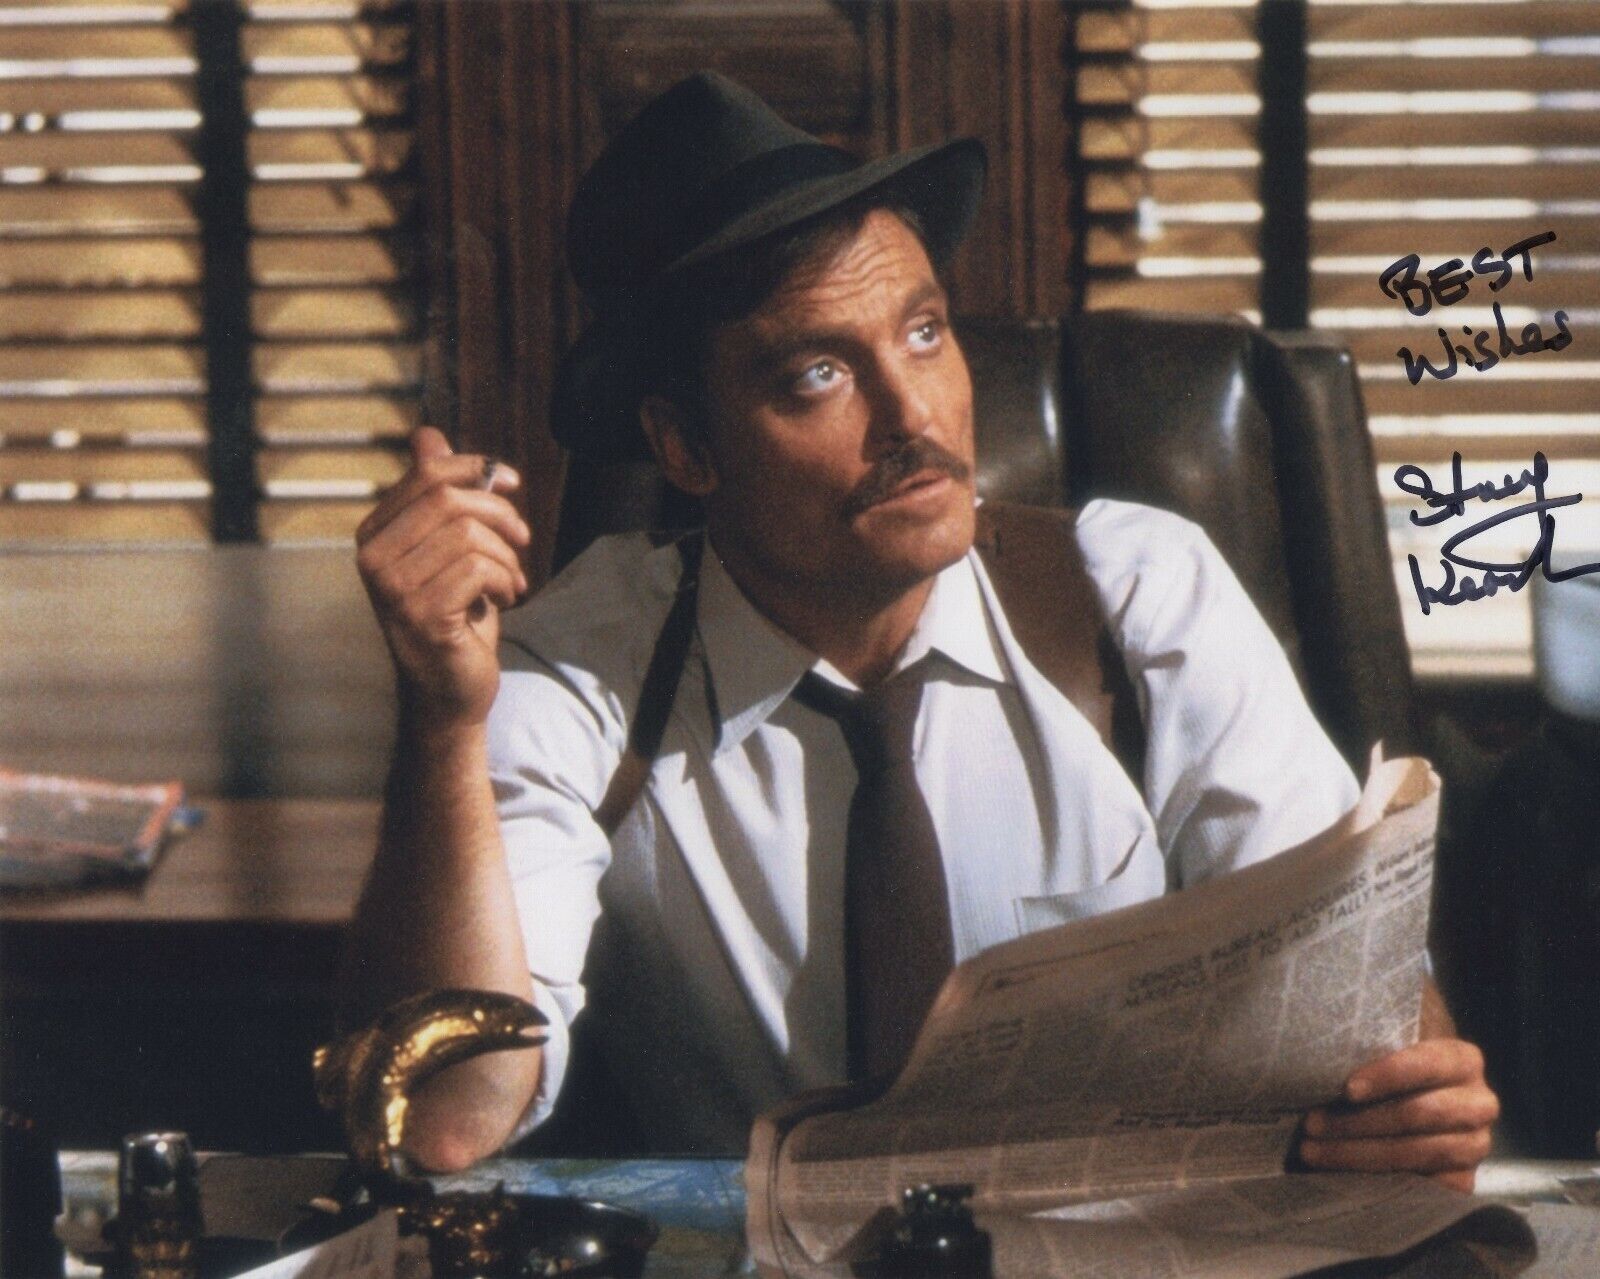 STACY KEACH SIGNED AUTOGRAPH 8X10 Photo Poster painting MIKE HAMMER #2